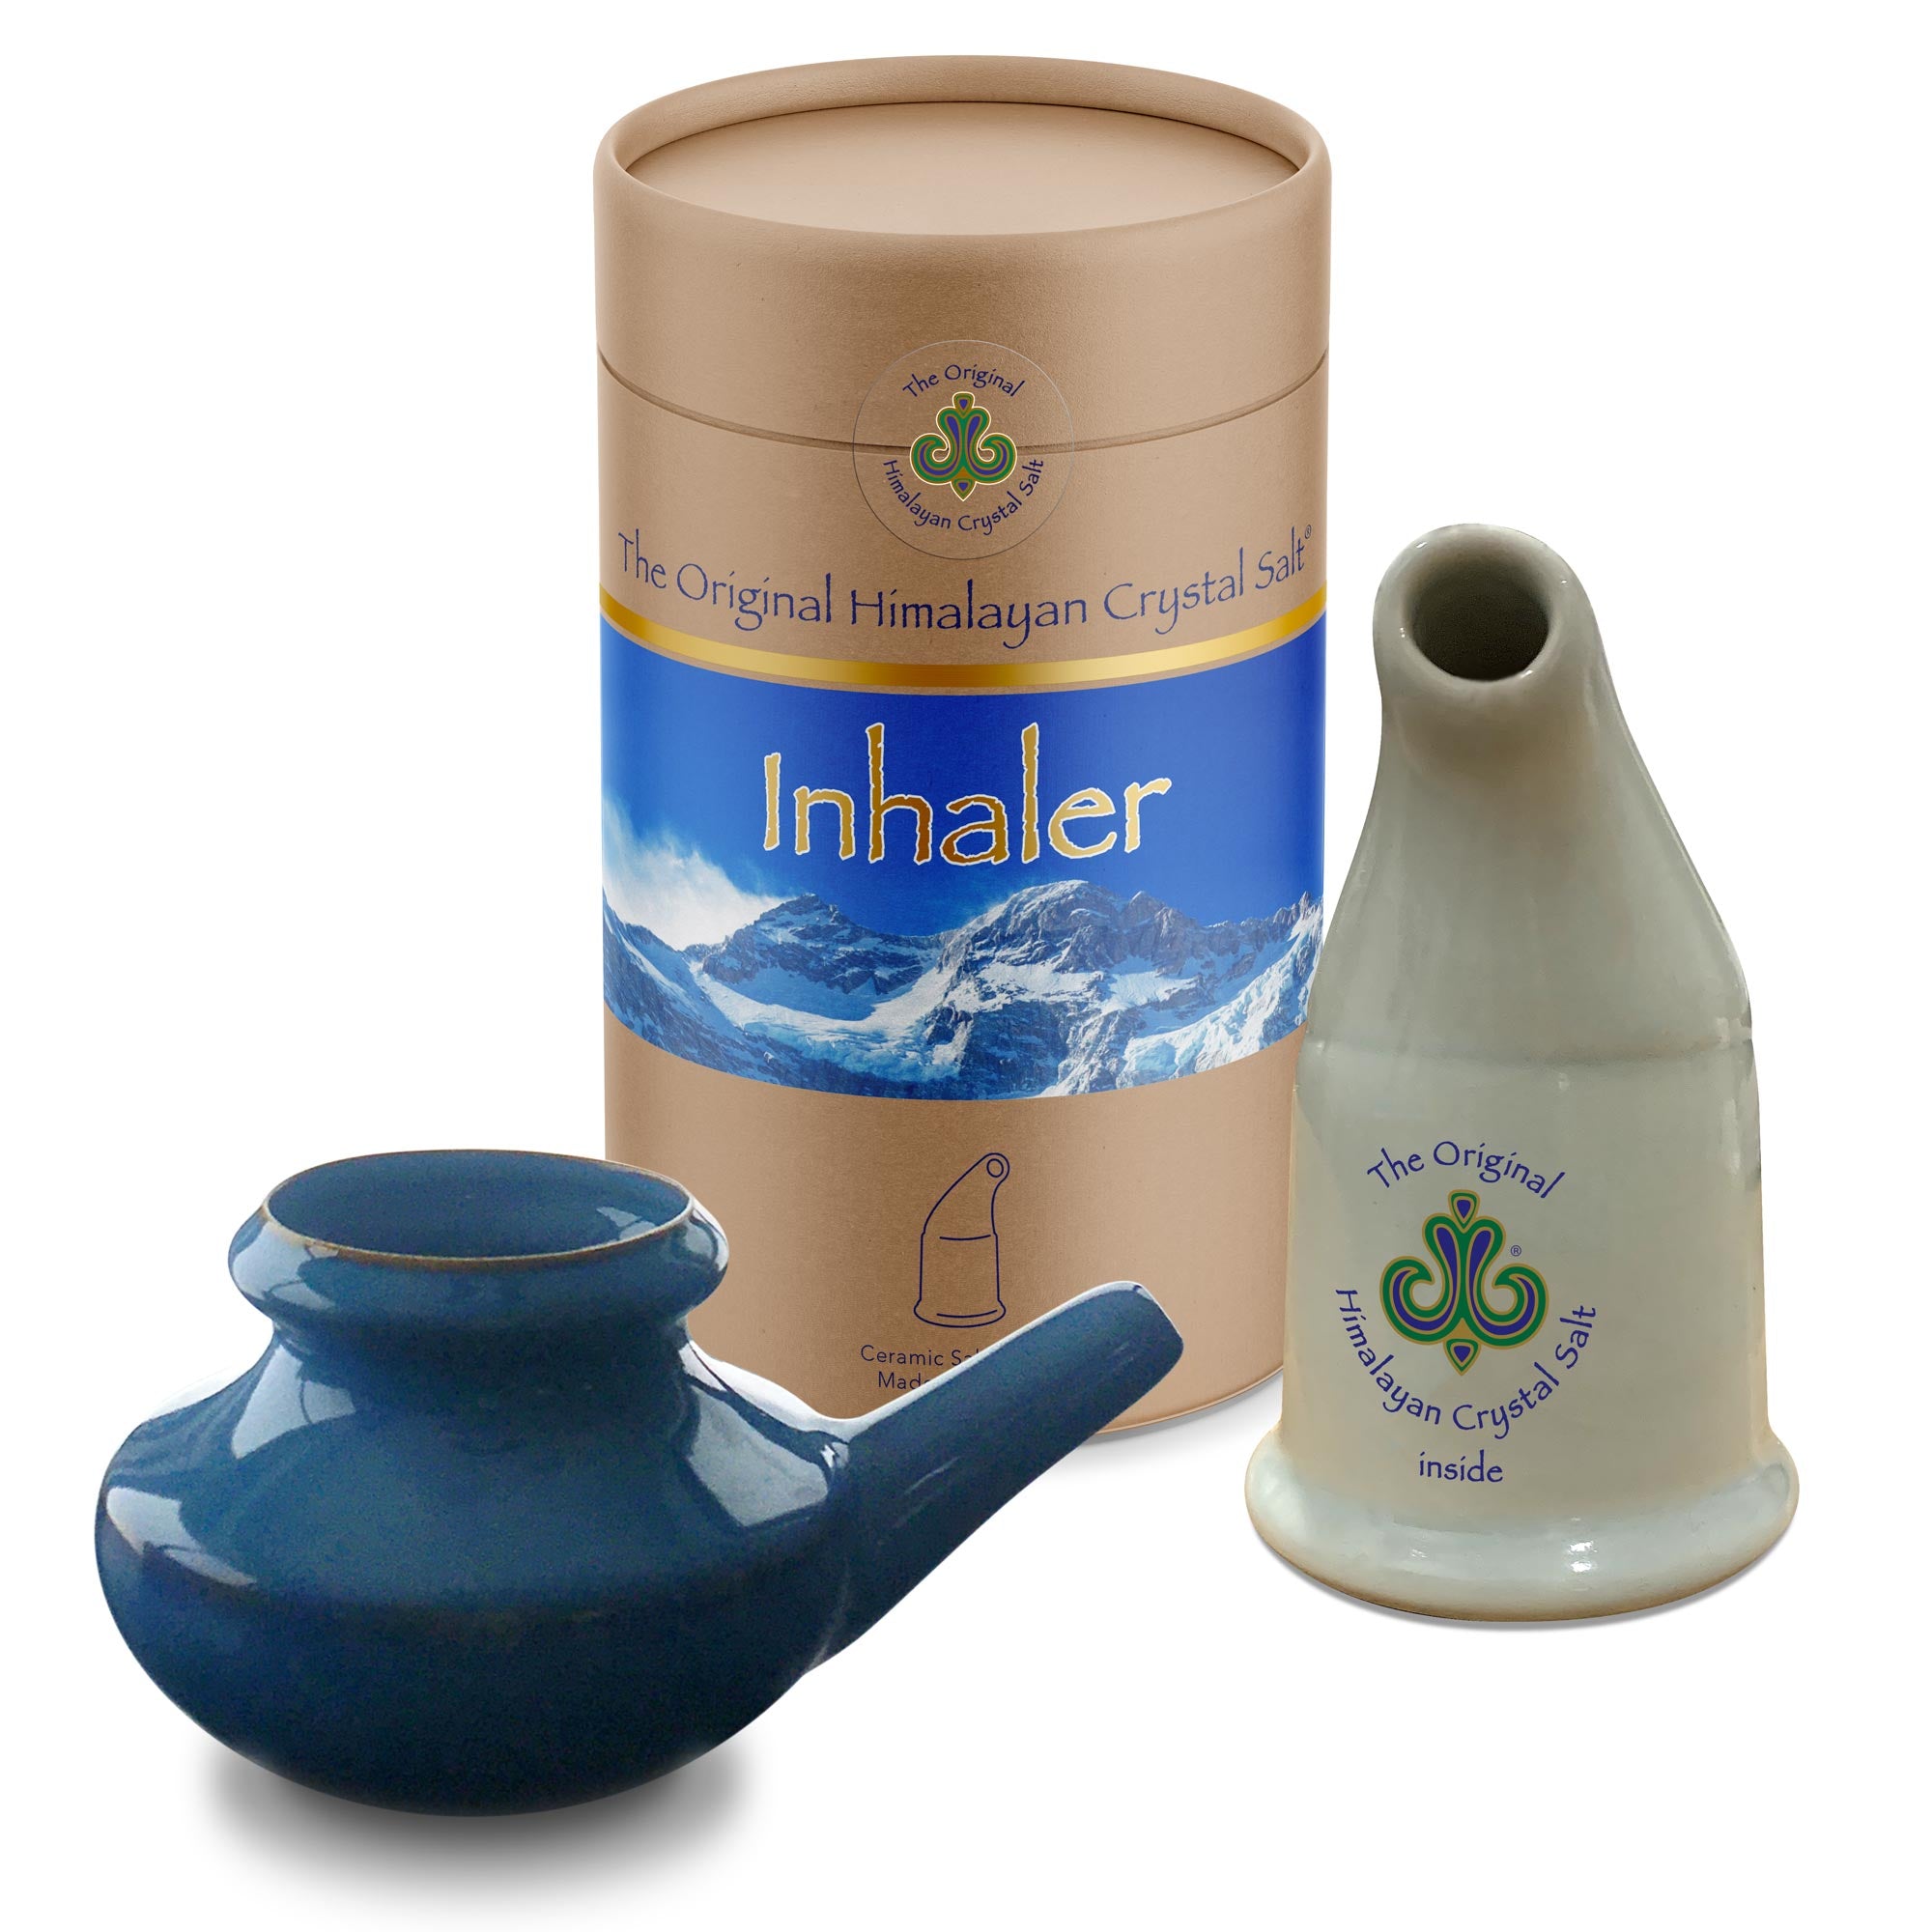 Inhaler + Neti Pot ceramic blue neti pot with brown accents, off-white ceramic inhaler and tan cylindrical box with gold band and snow-capped mountains and blue sky, on white background